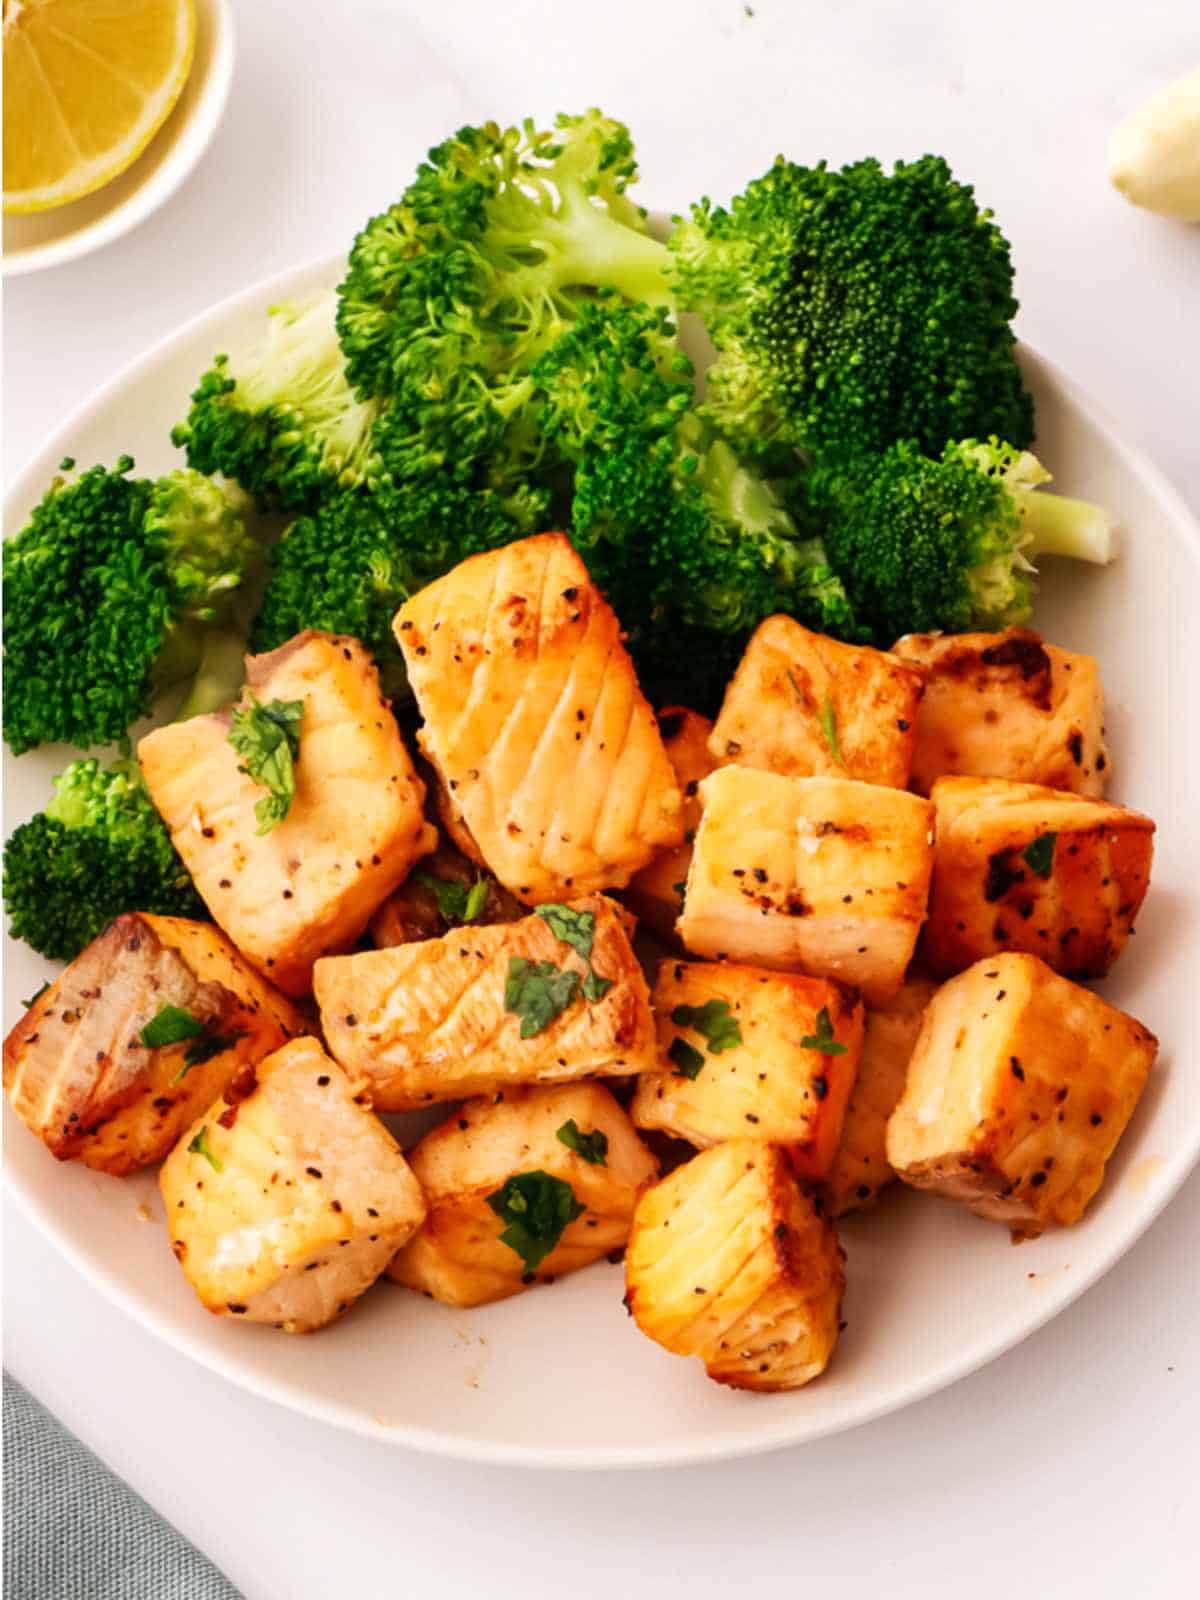 salmon bites on a plate with broccoli.